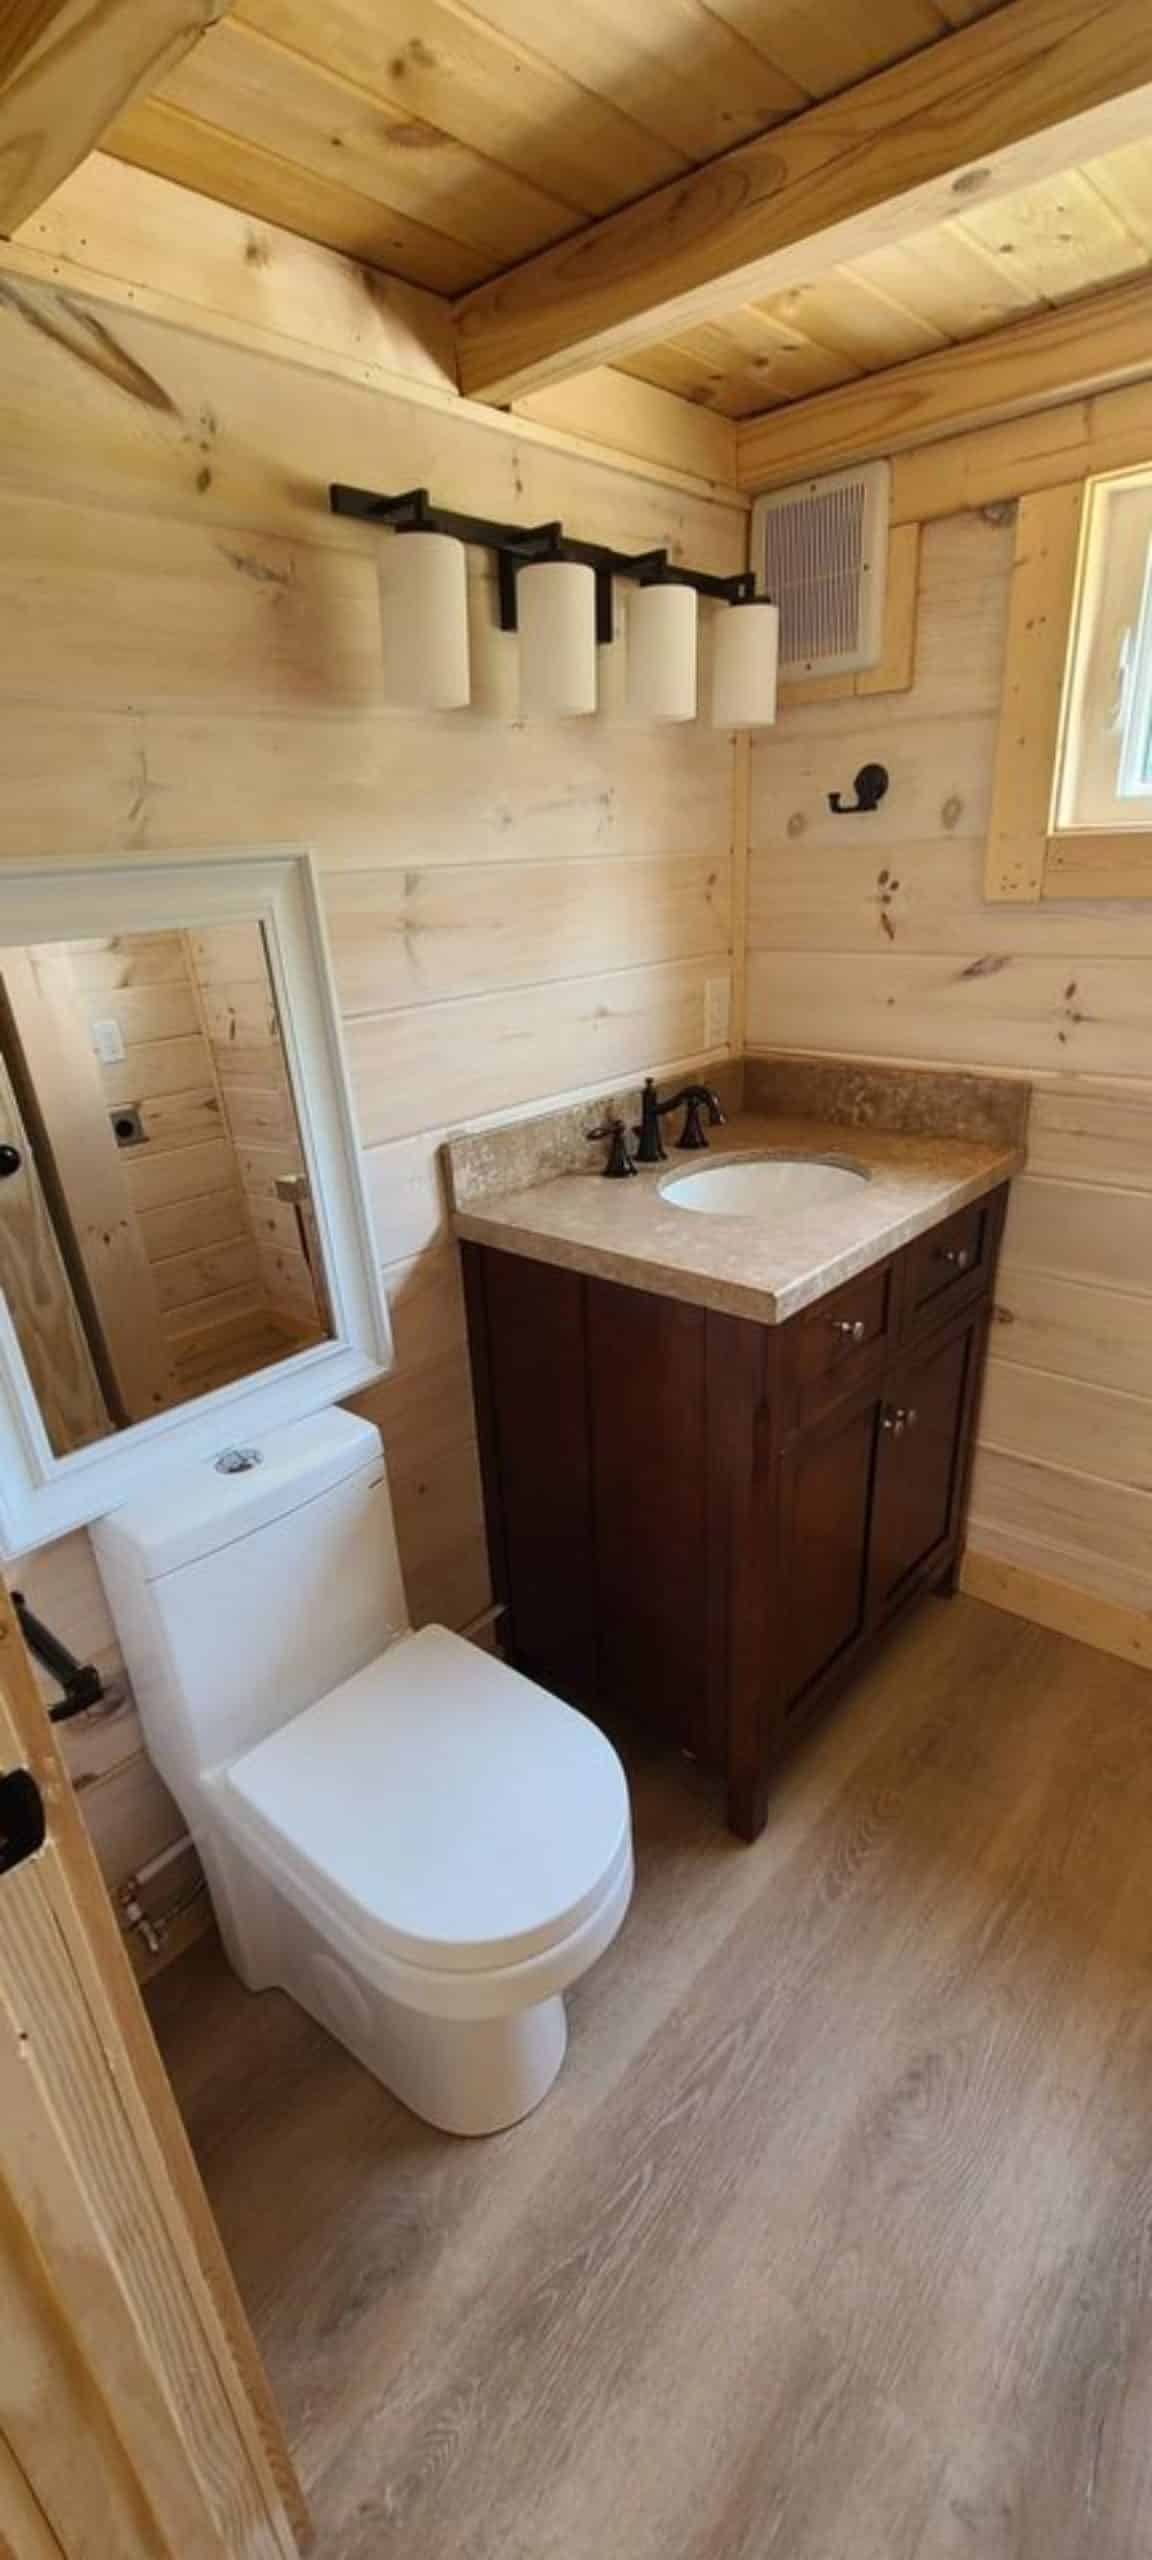 standard fittings in bathroom of 20' lofted tiny home